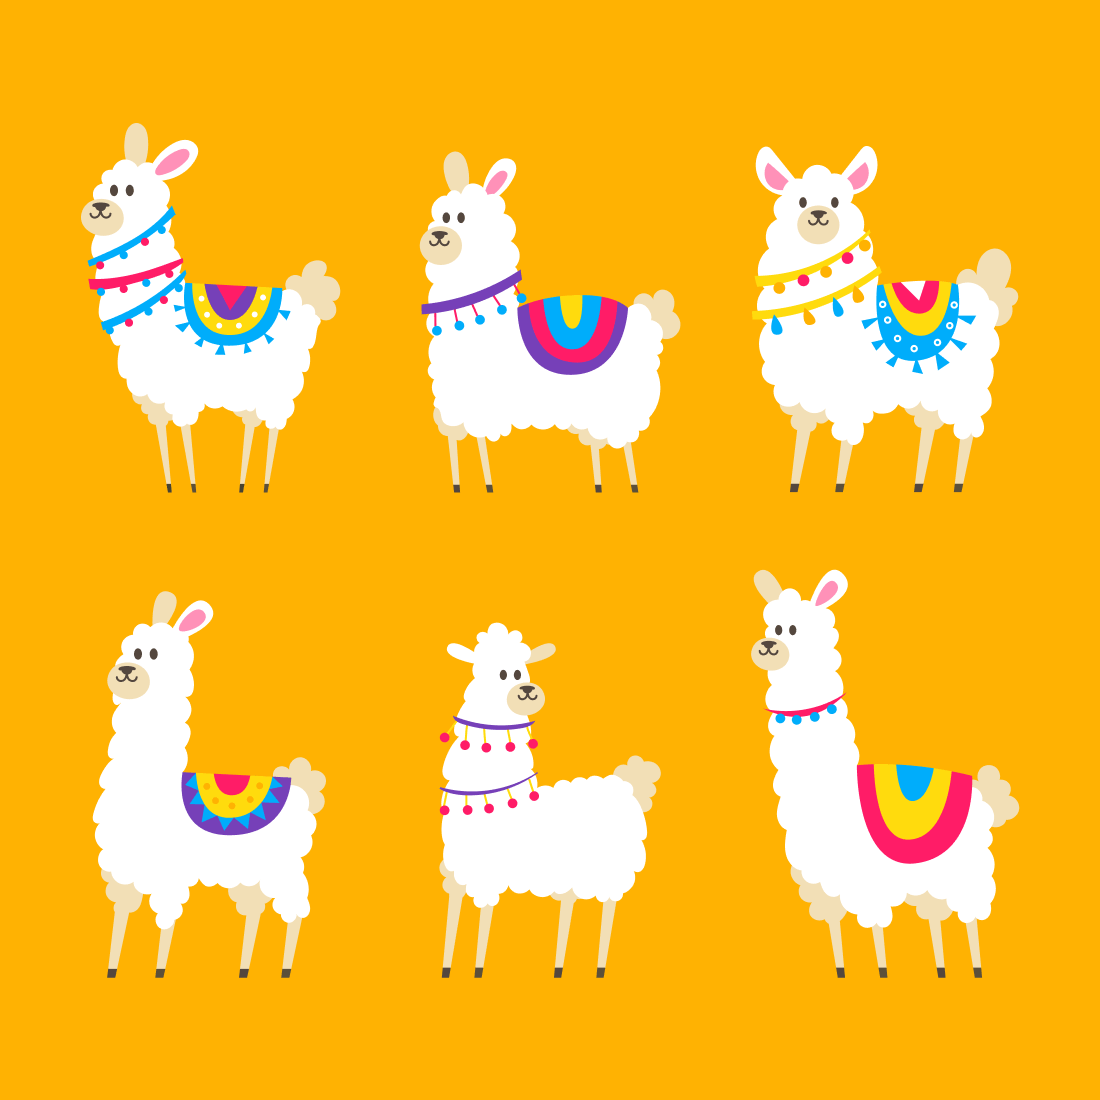 Group of llamas with different colors on a yellow background.